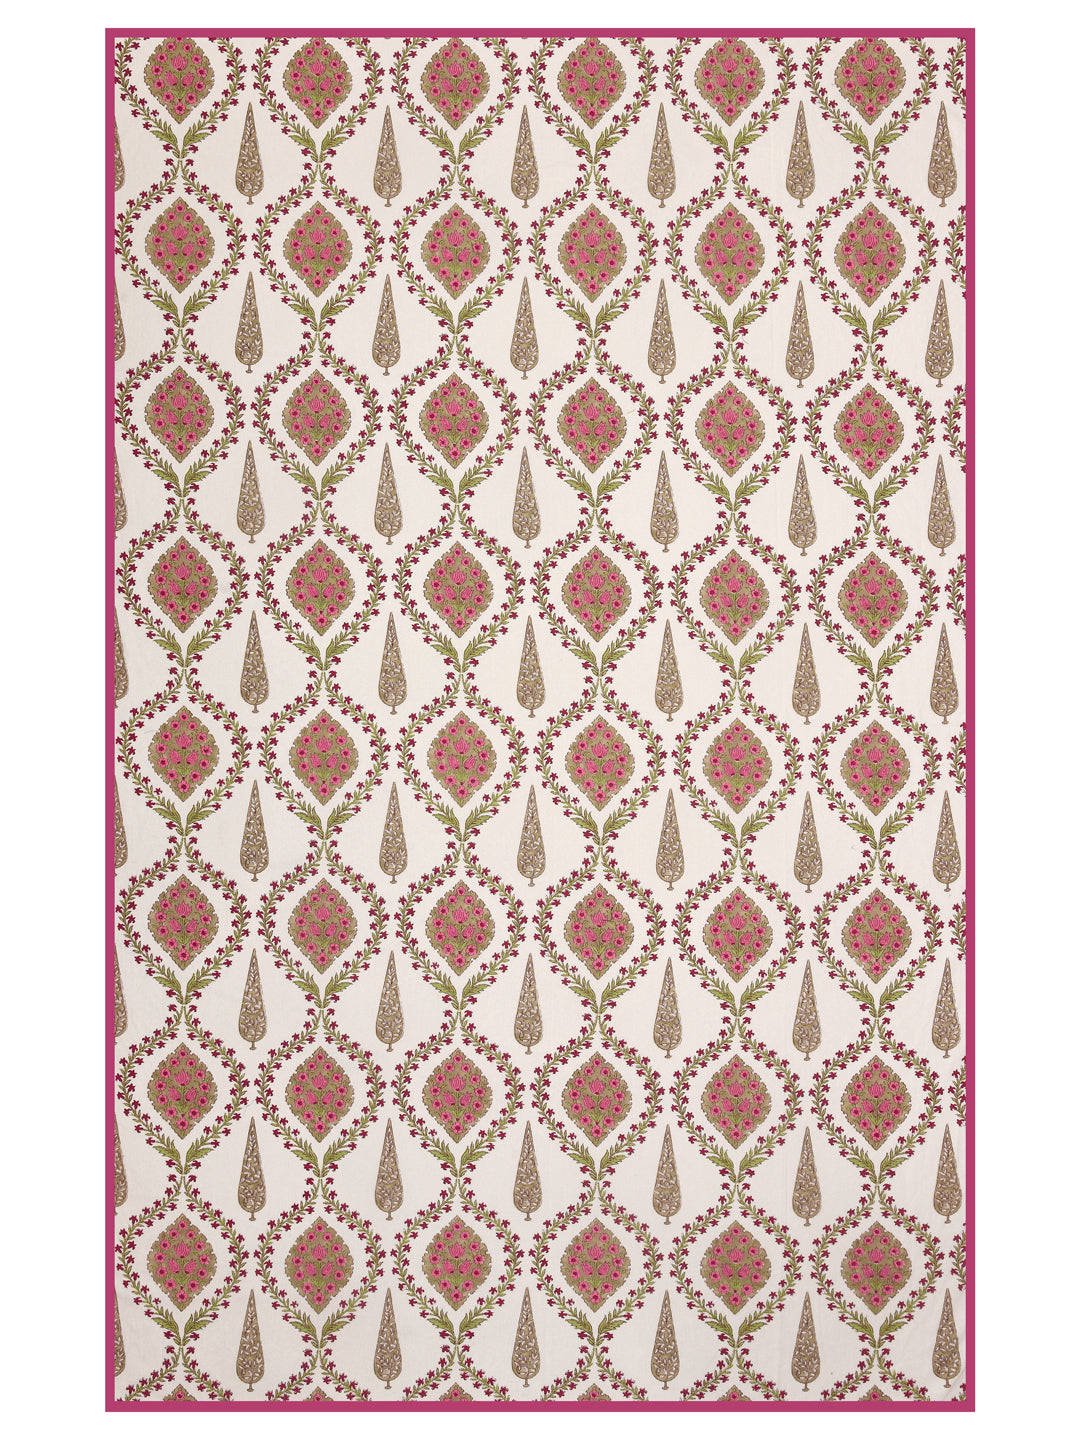 100% Cotton Oval Table Cover; Pink Beige Block Print